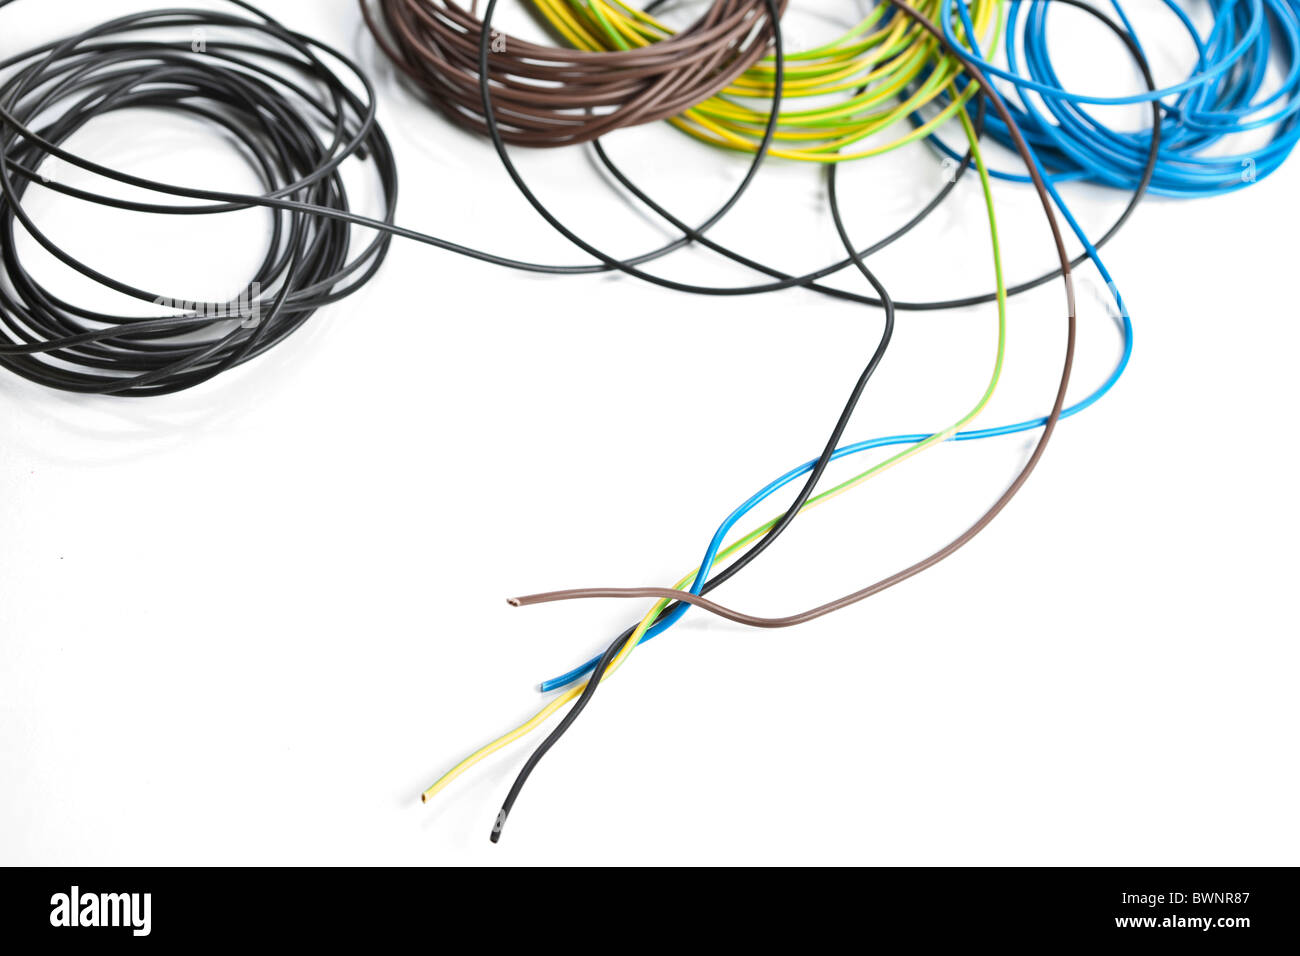 Colorful coils of cables on a white background Stock Photo